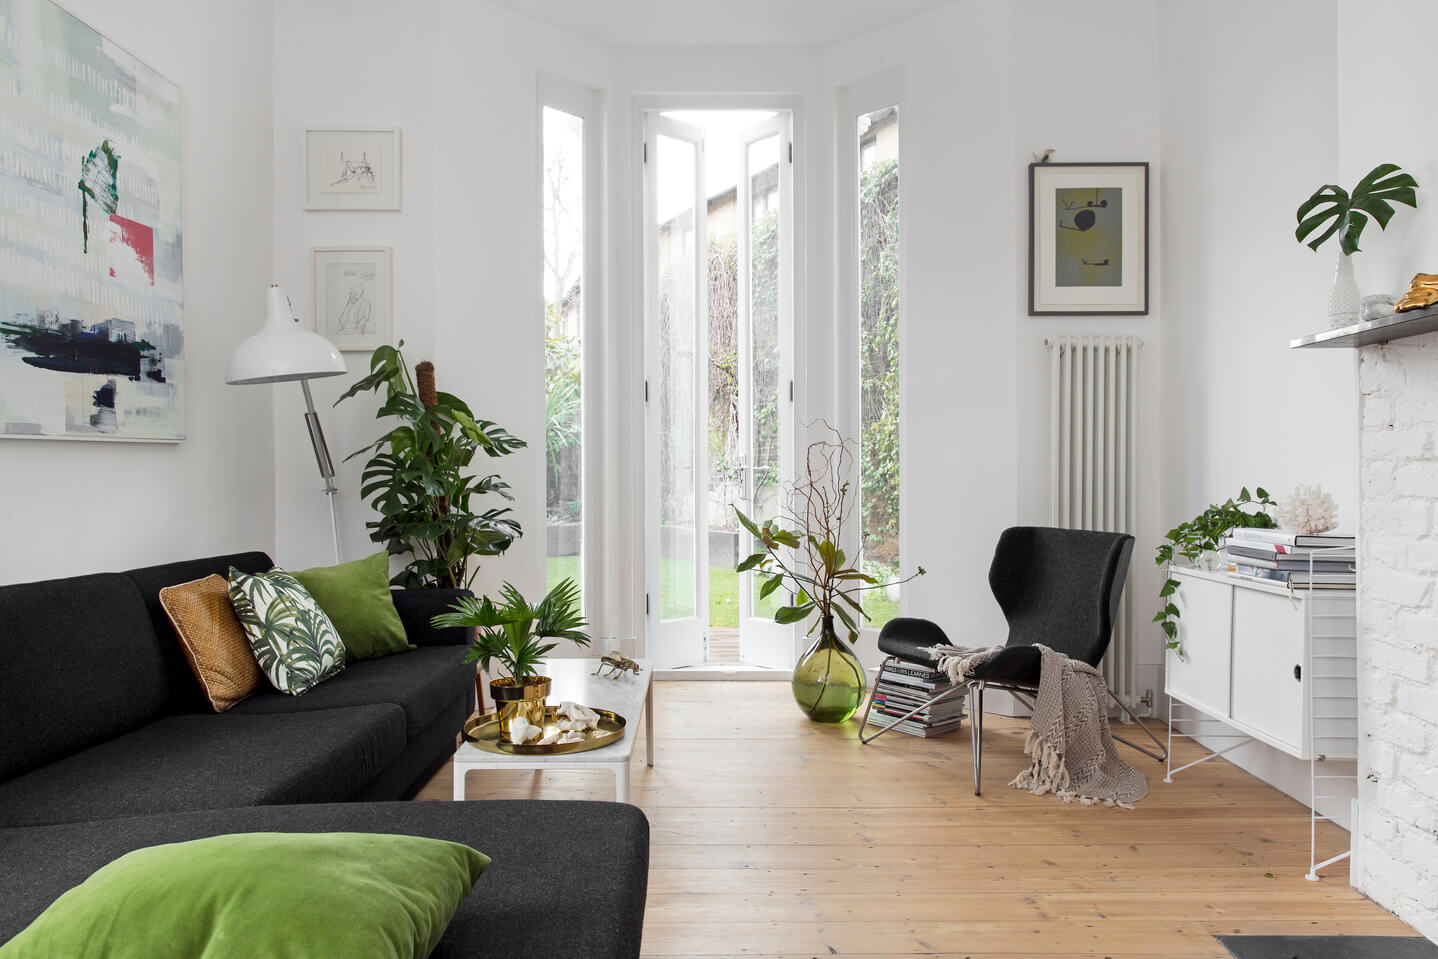 At home with Sofia Sköld from Vild - House of Little